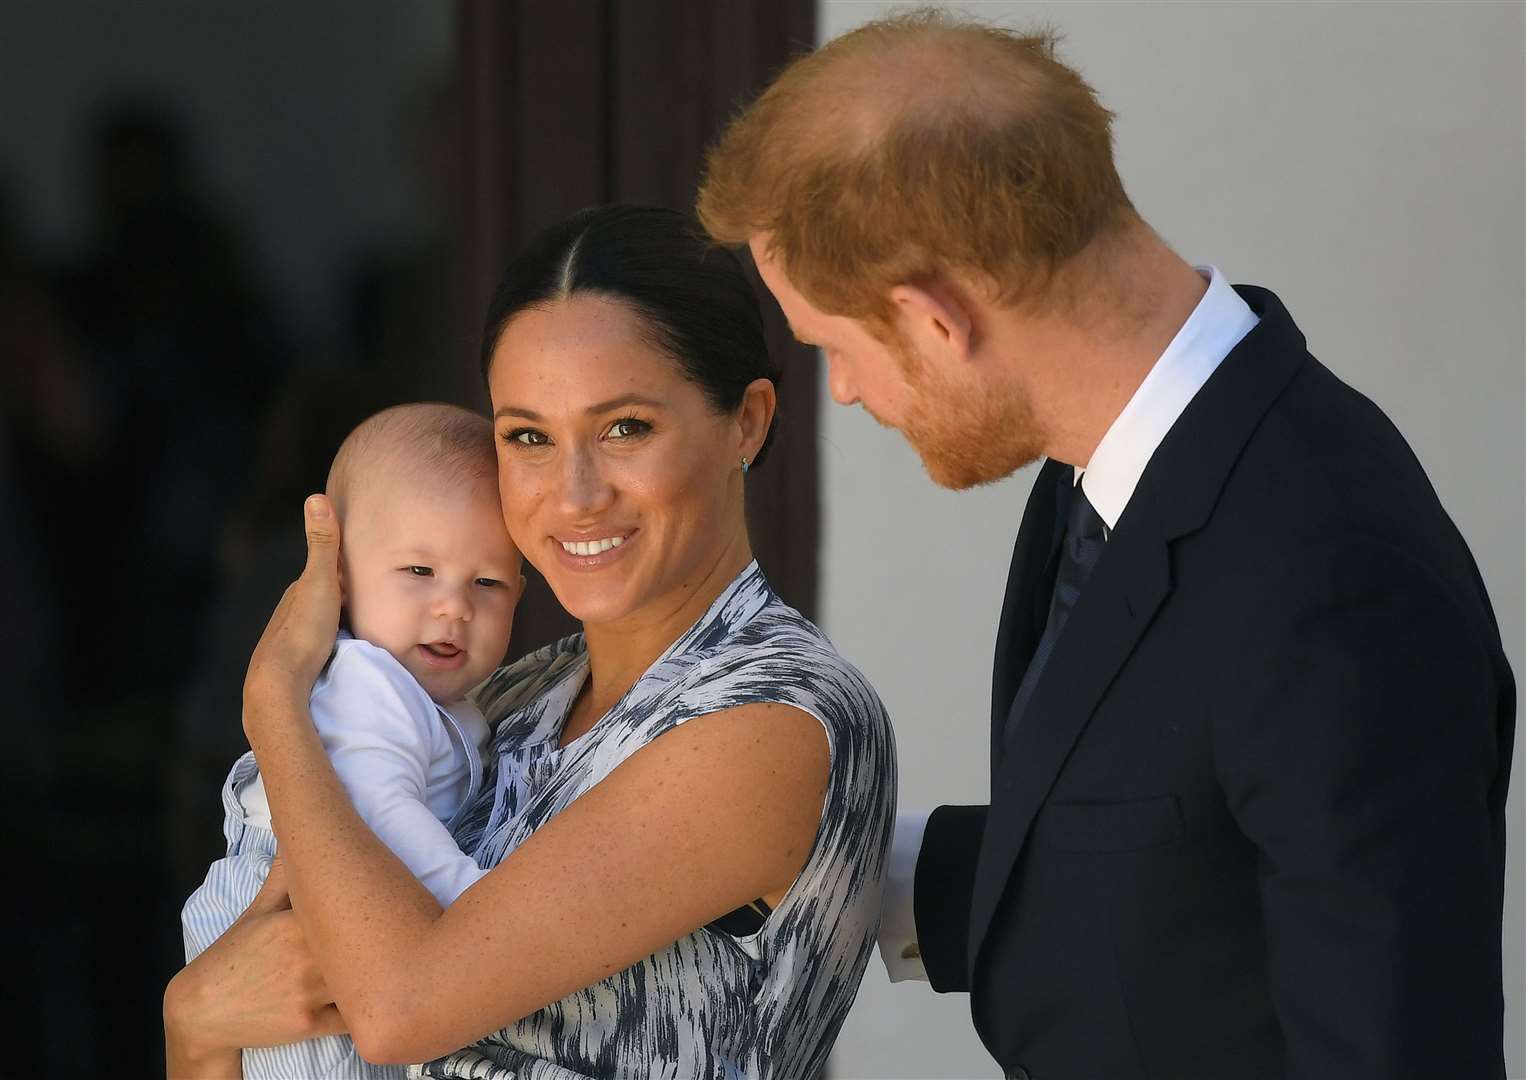 The Duke and Duchess of Sussex hold their son Archie in 2019 (PA)